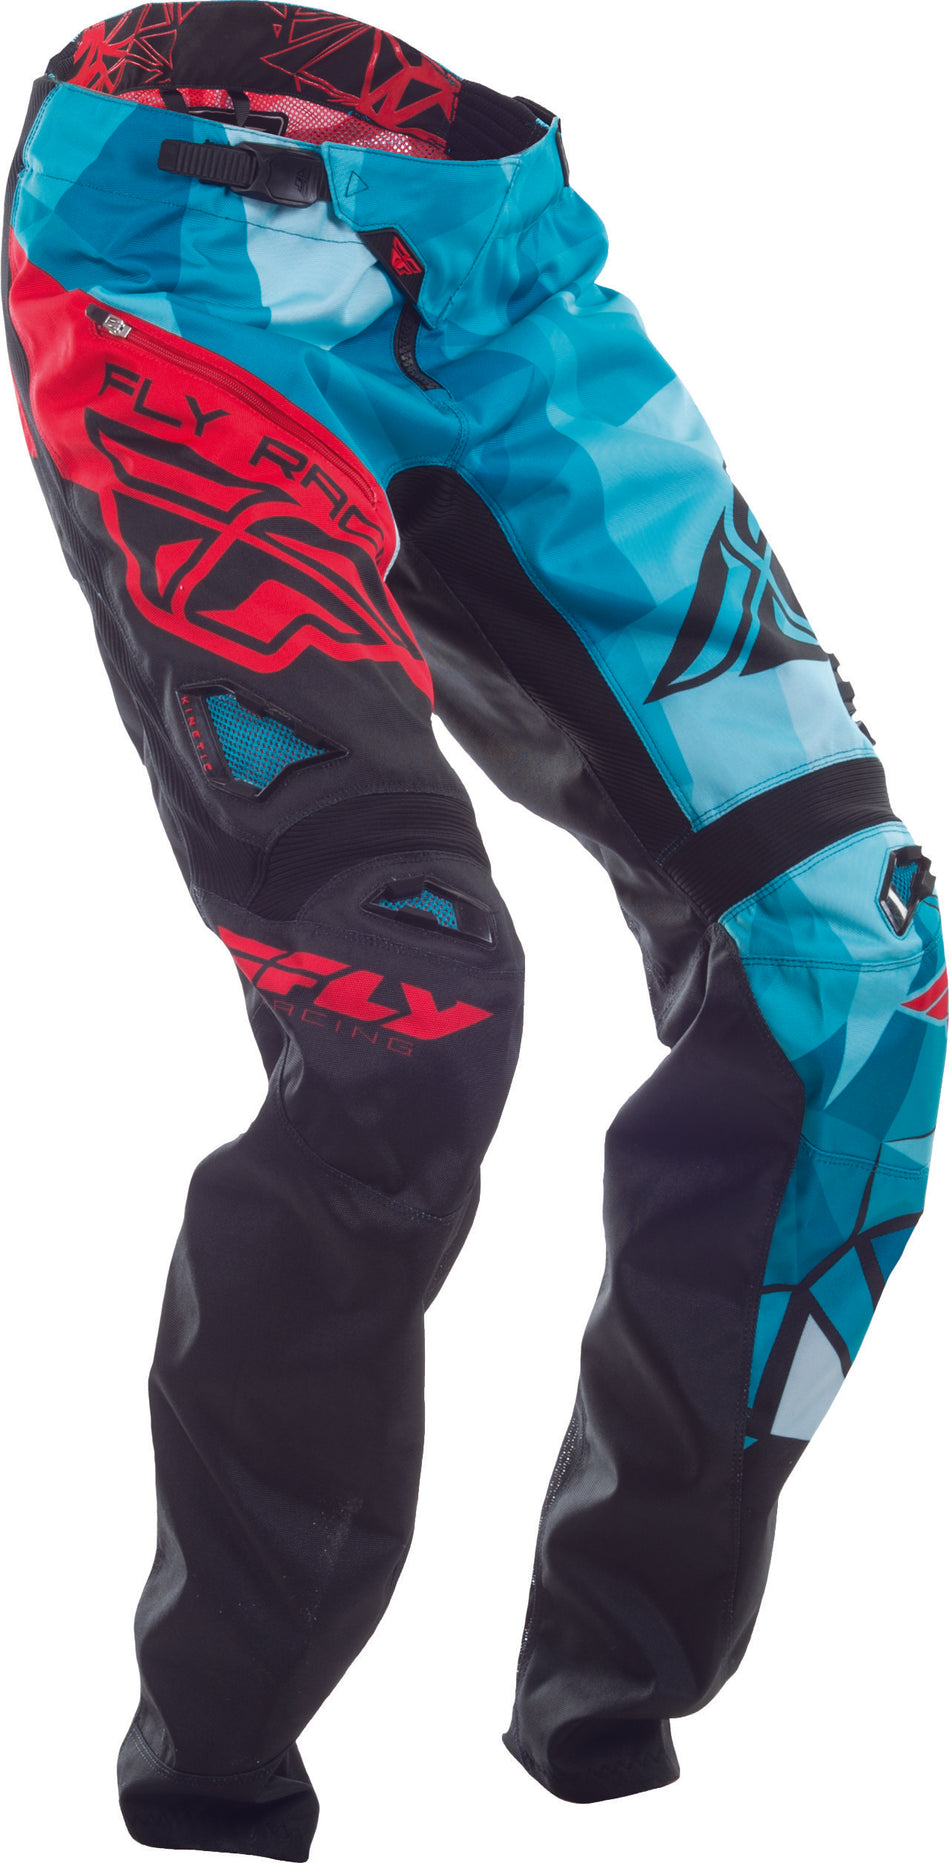 FLY RACING Bicycle Crux Pant Black/Teal/Red Sz 18 370-02918